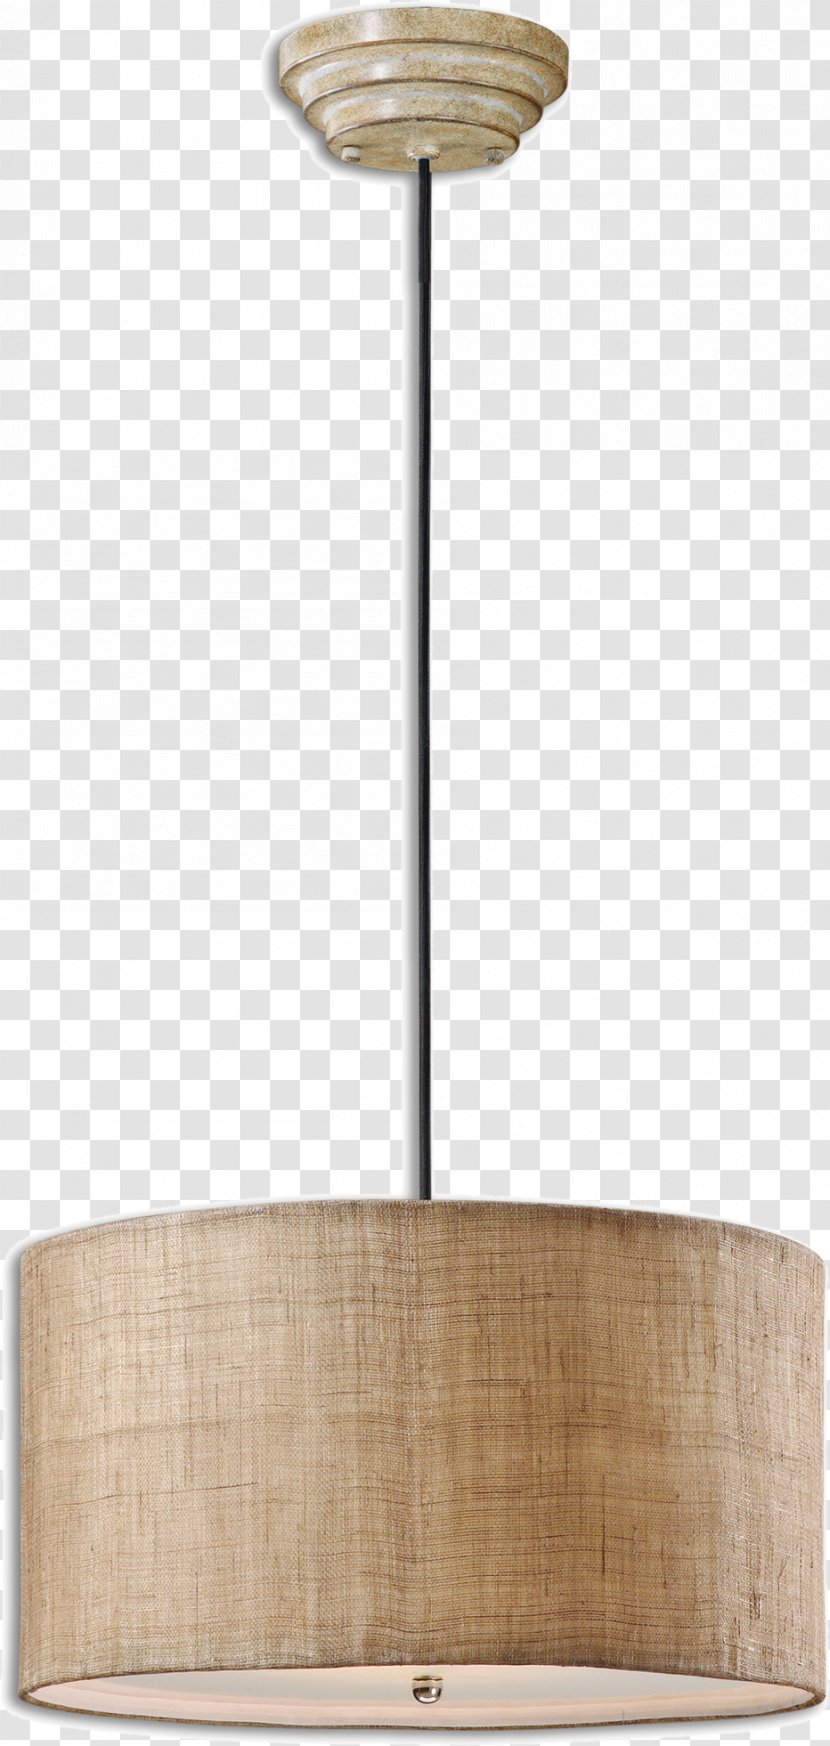 Light Background - Ceiling Fixtures - Lighting Accessory Lampshade Transparent PNG